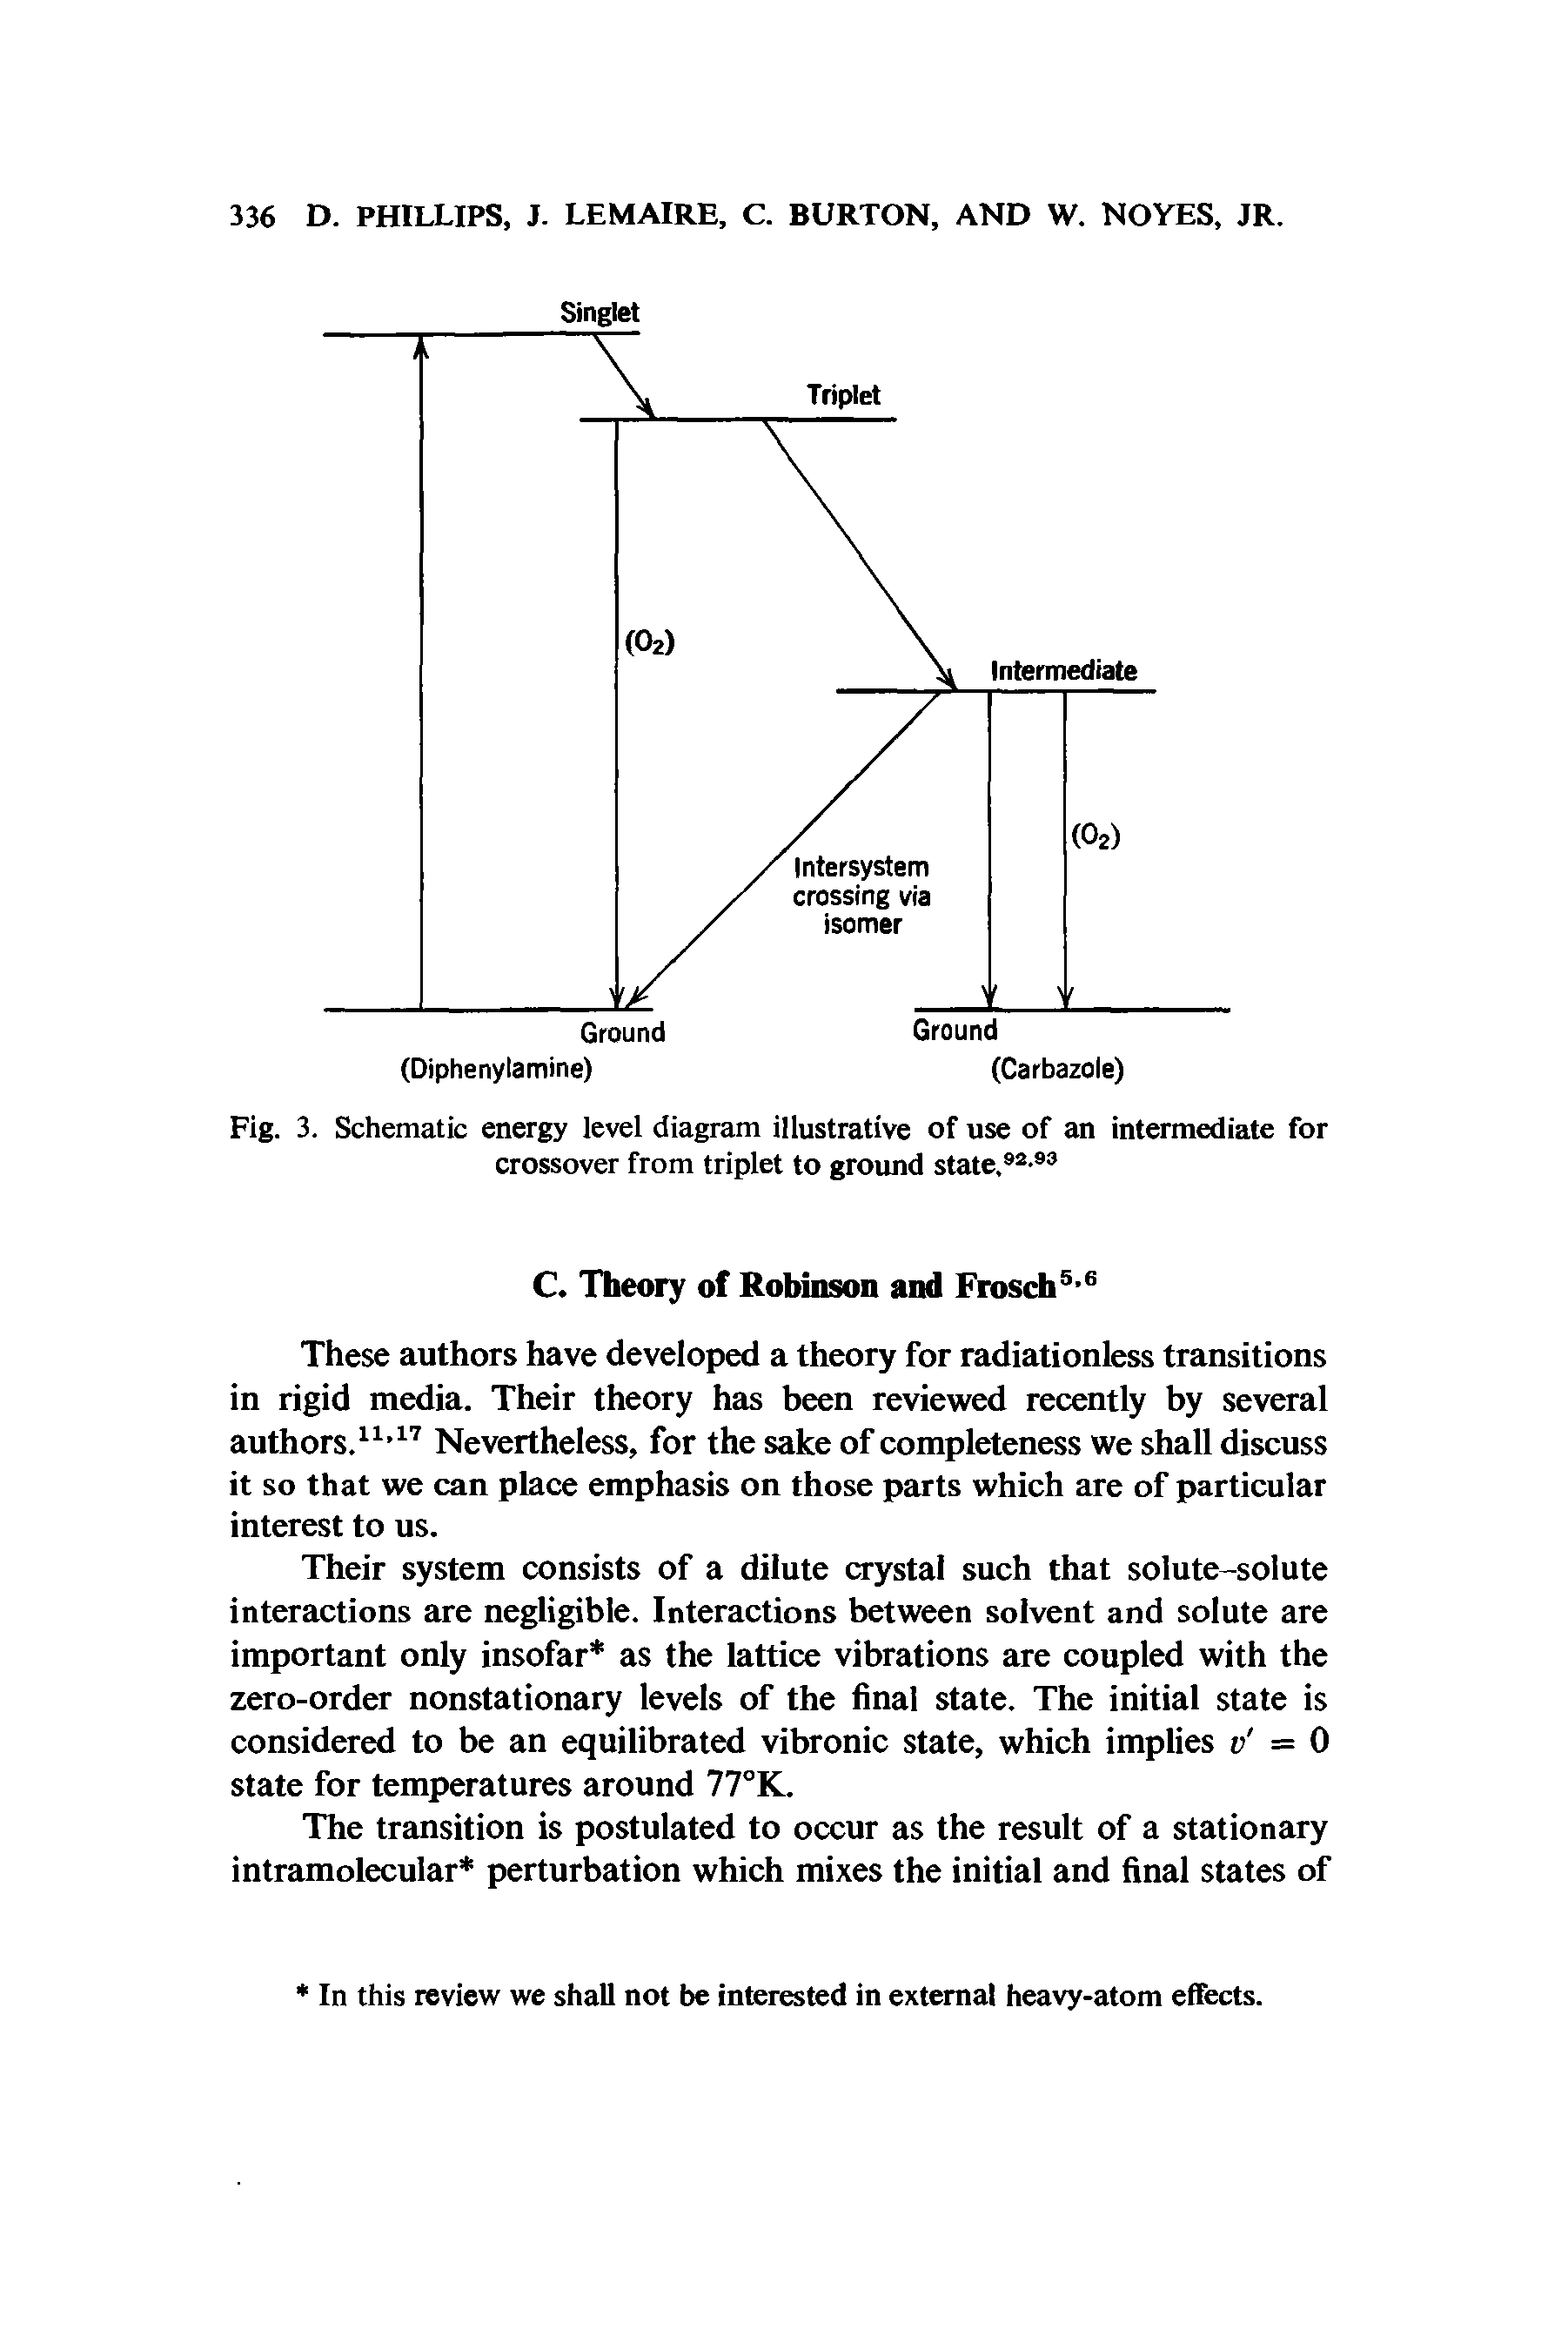 Fig. 3. Schematic energy level diagram illustrative of use of an intermediate for crossover from triplet to ground state,92-93...